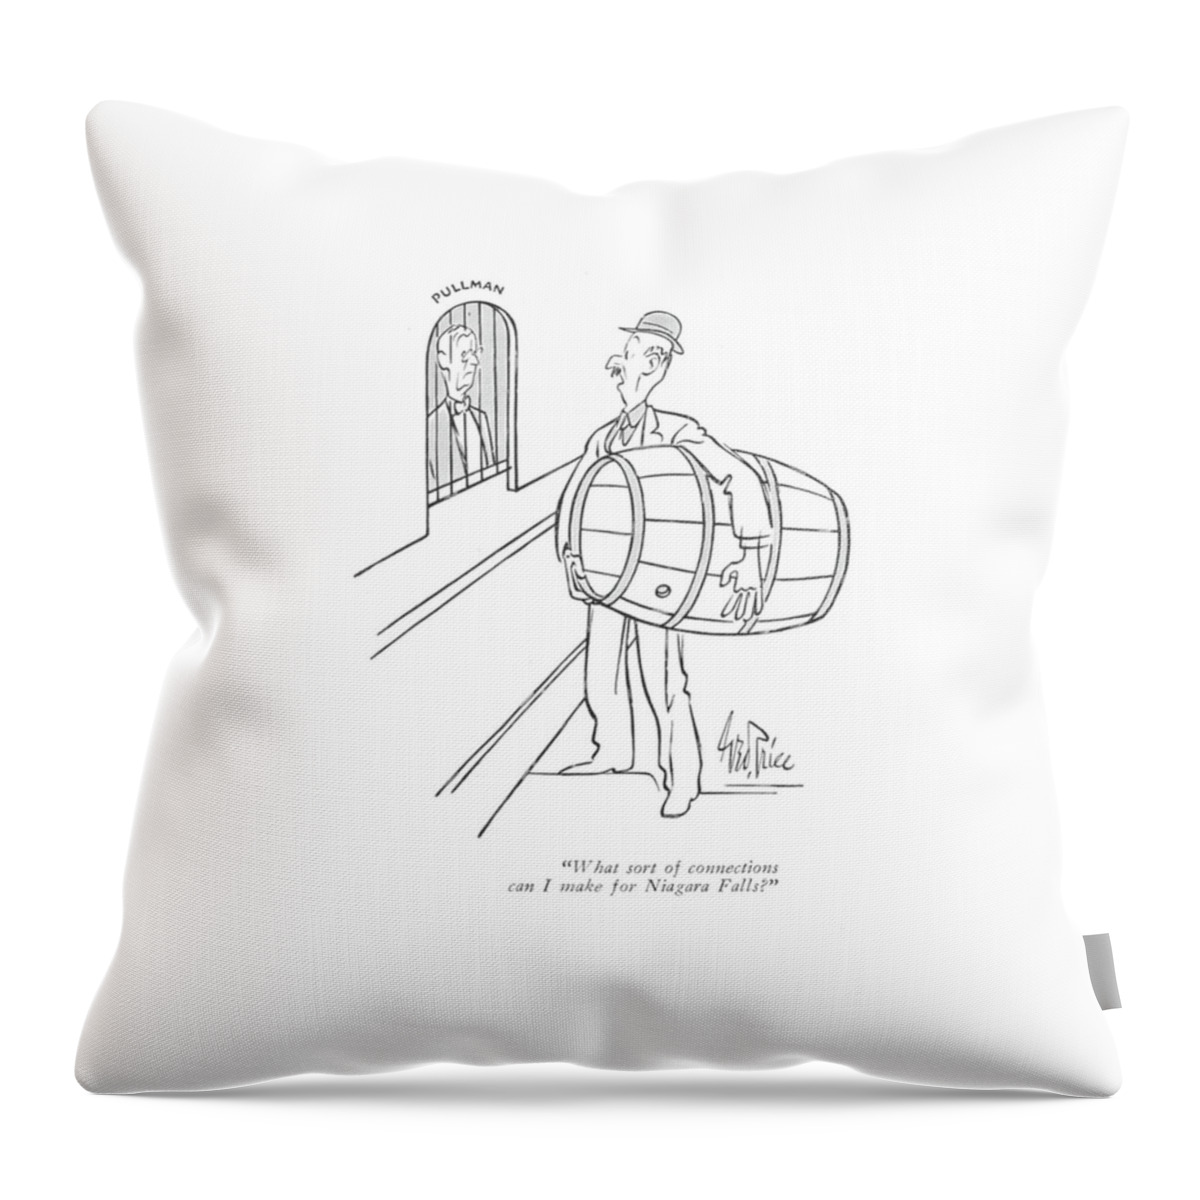 What Sort Of Connections Can I Make For Niagara Throw Pillow